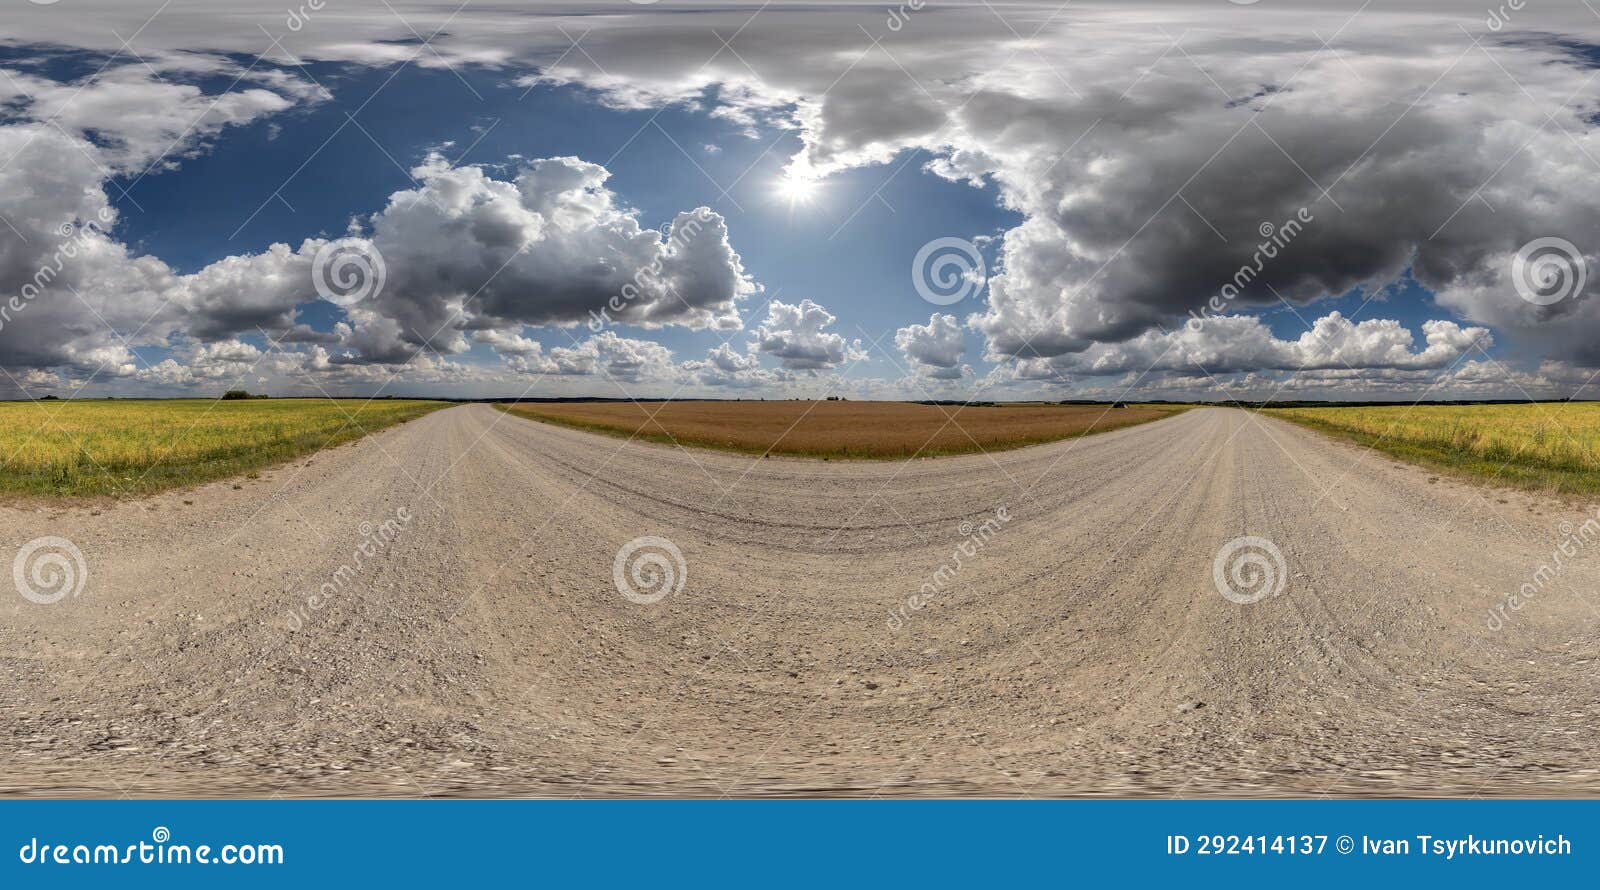 360 hdri panorama on white sand gravel road with clouds on blue sky in equirectangular spherical seamless projection, skydome